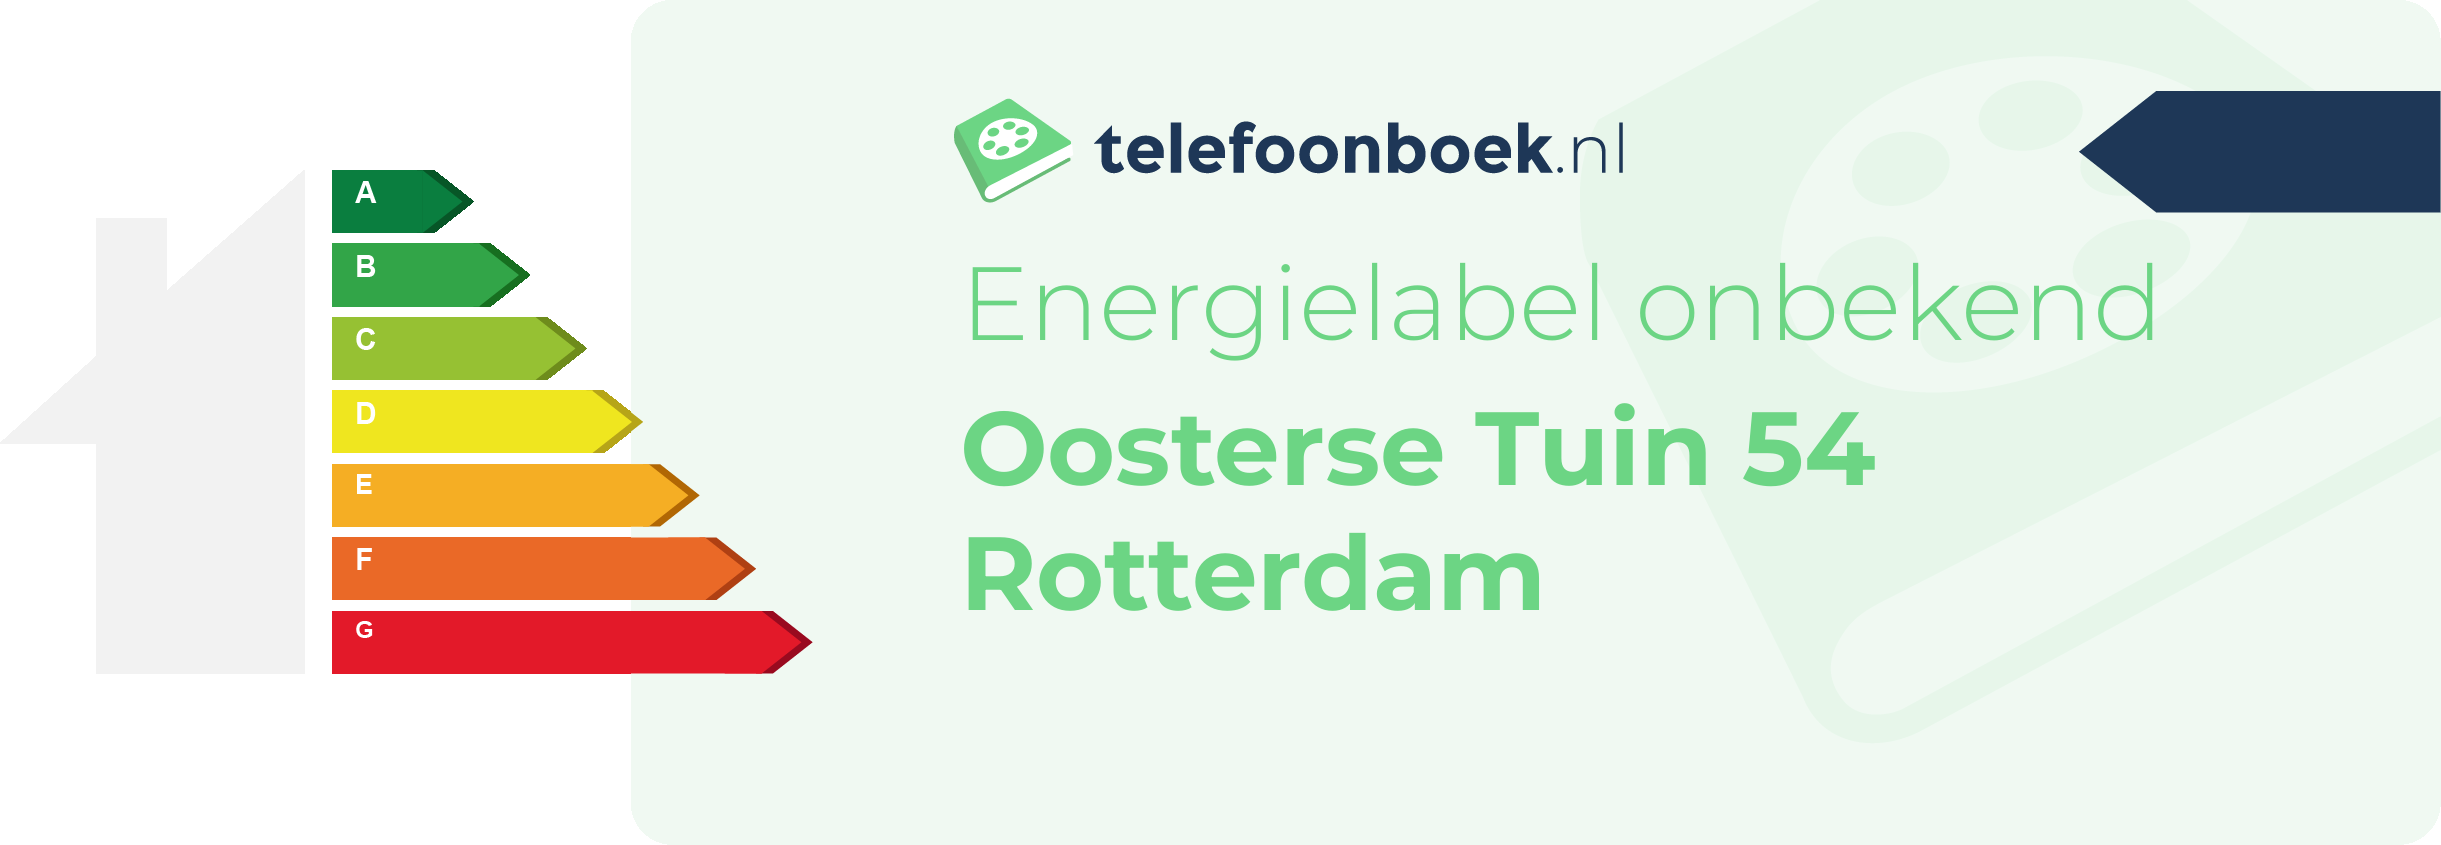 Energielabel Oosterse Tuin 54 Rotterdam